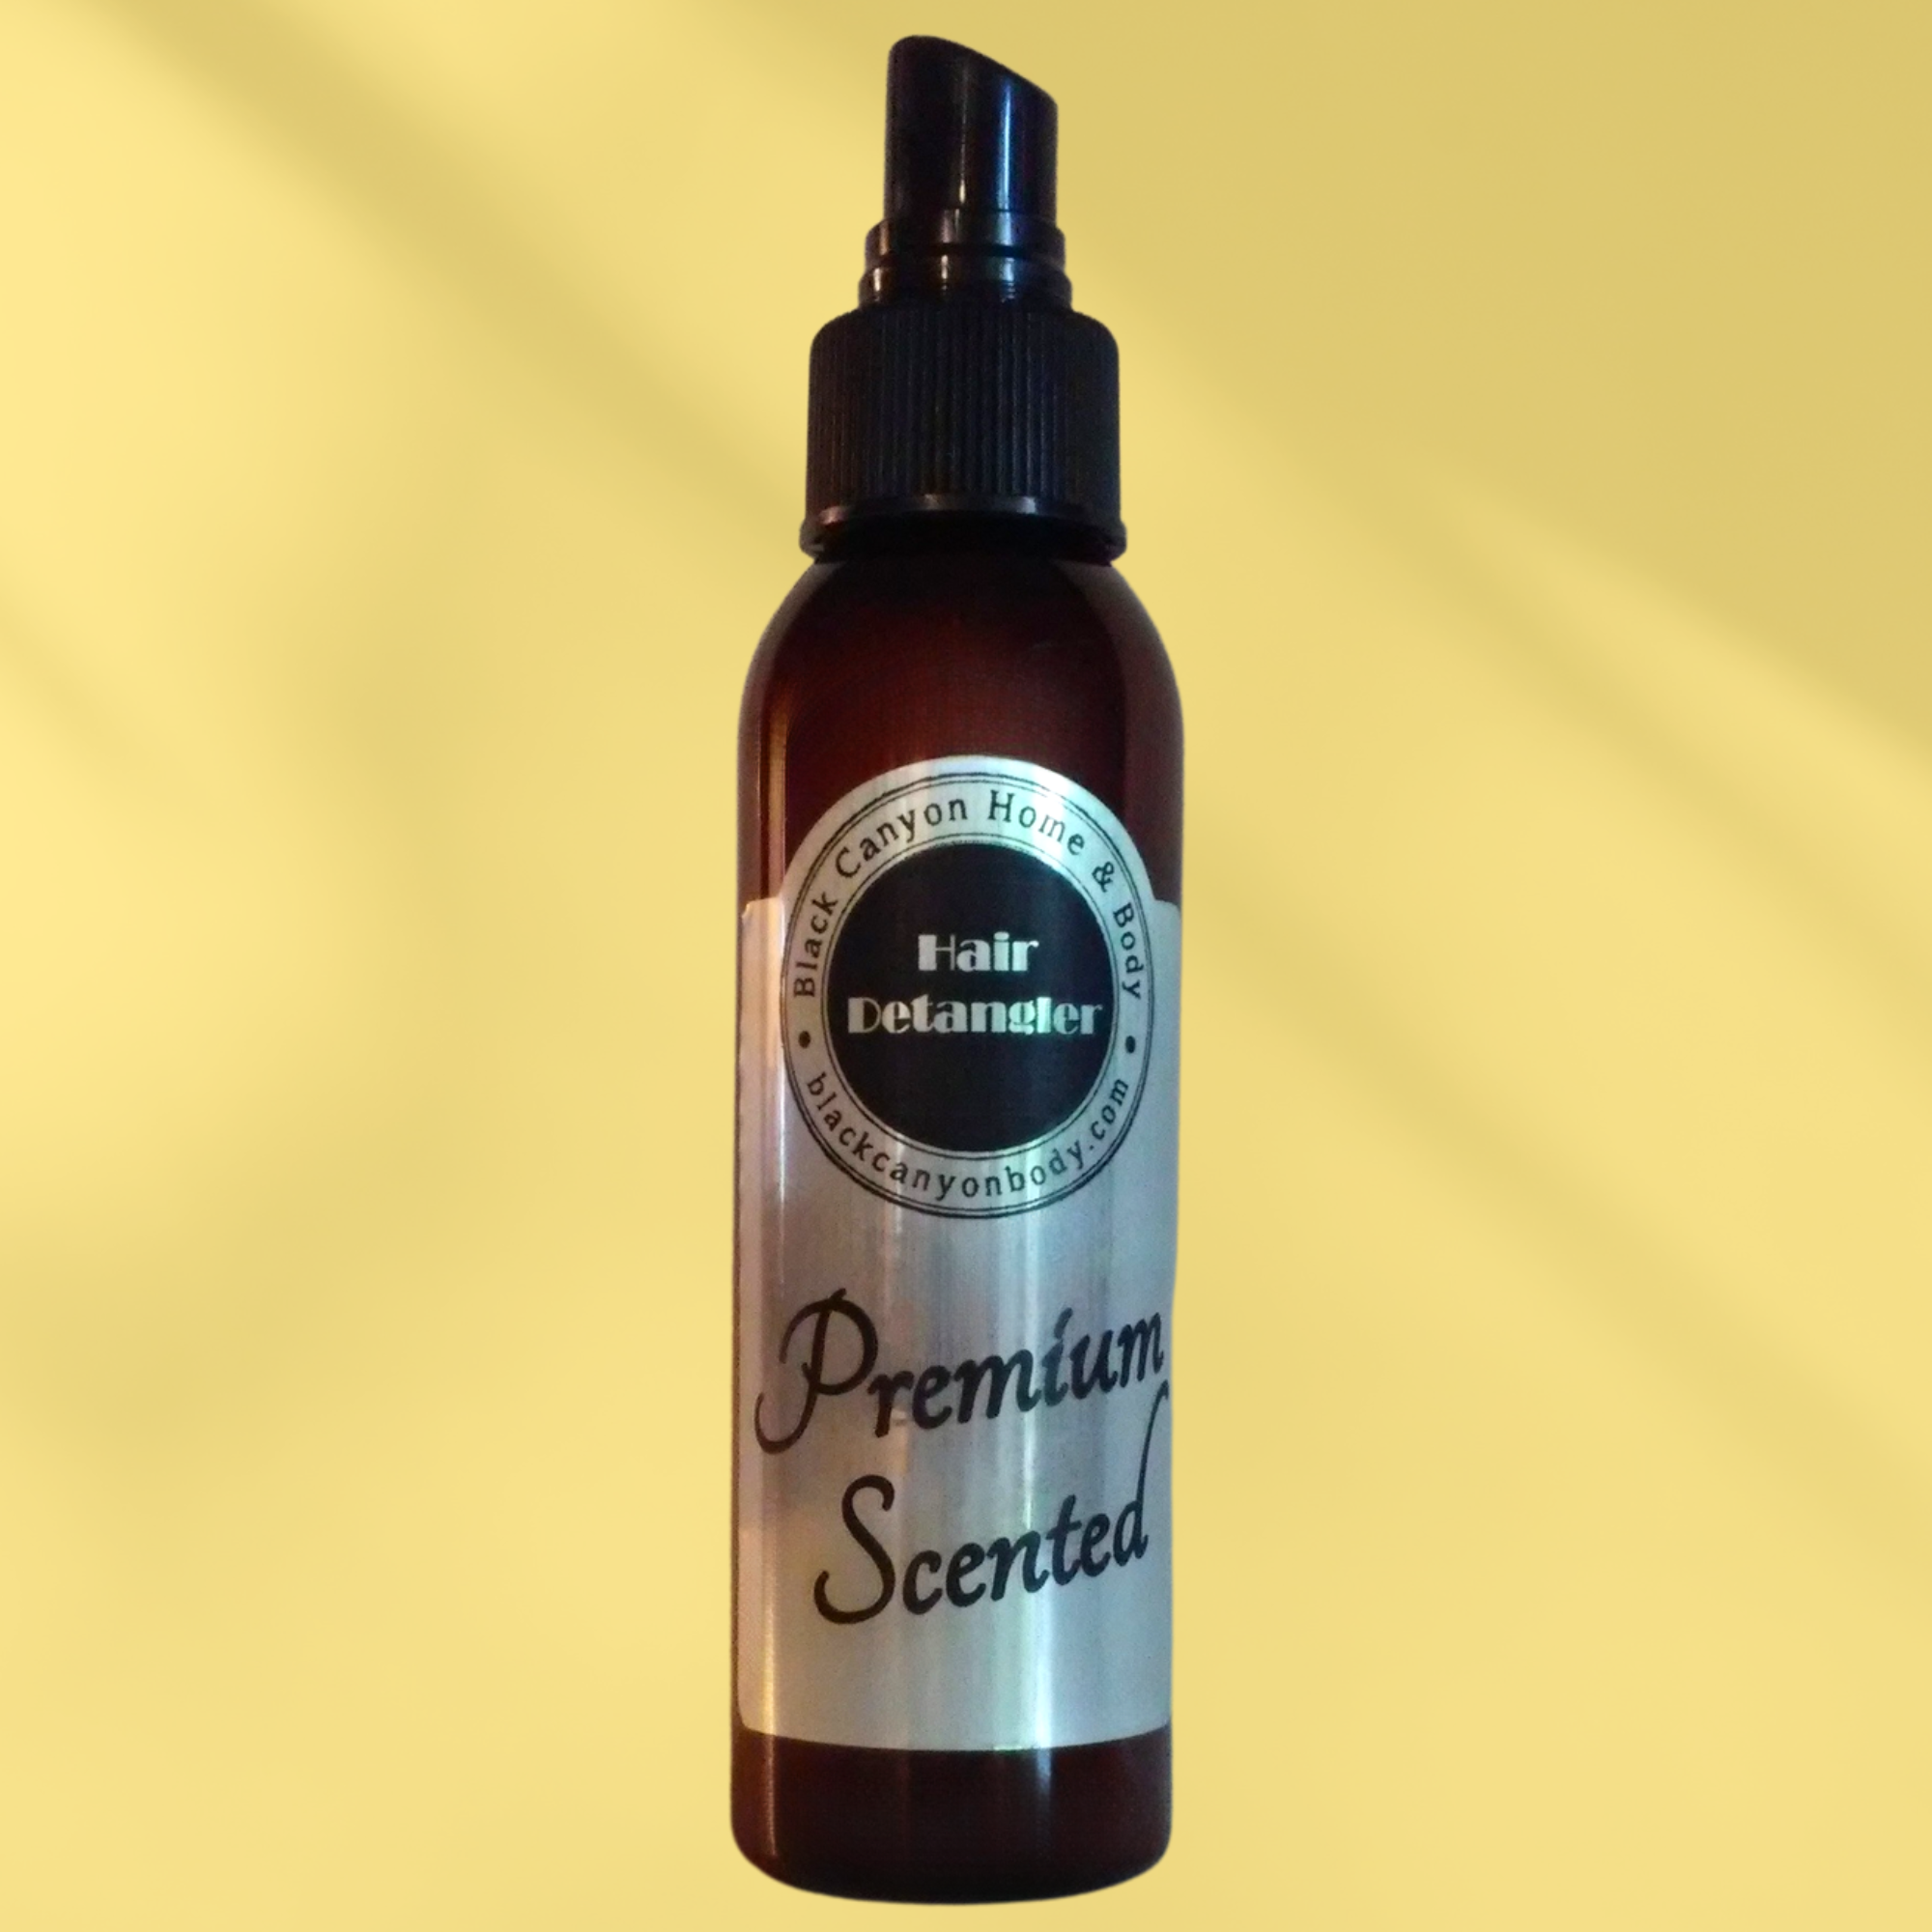 Black Canyon Vanilla & Sugared Apricot Scented Hair Detangler Spray with Olive Oil